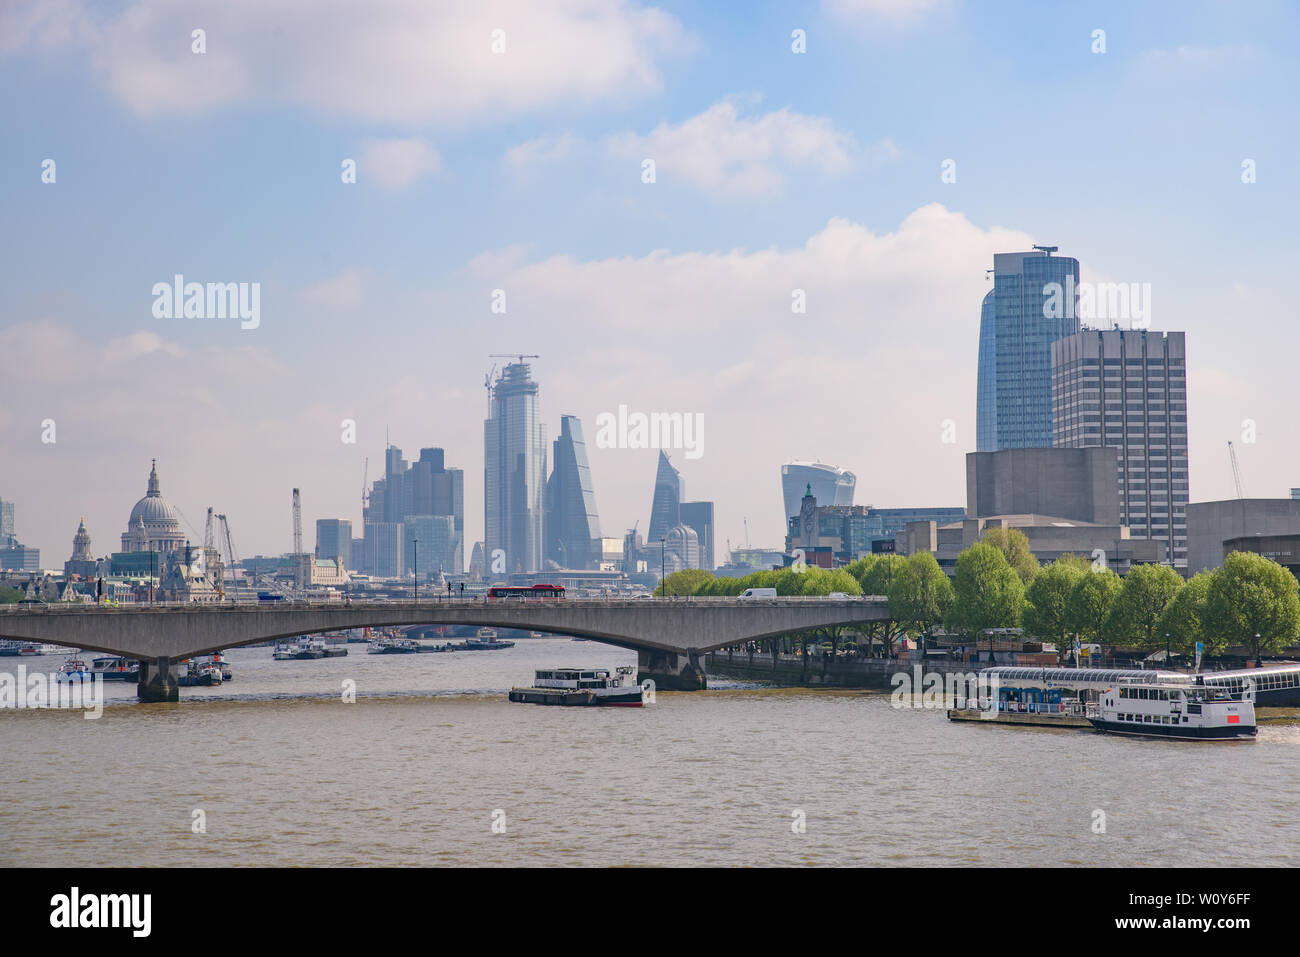 Boats on the River Thames in London, United Kingdom Stock Photo